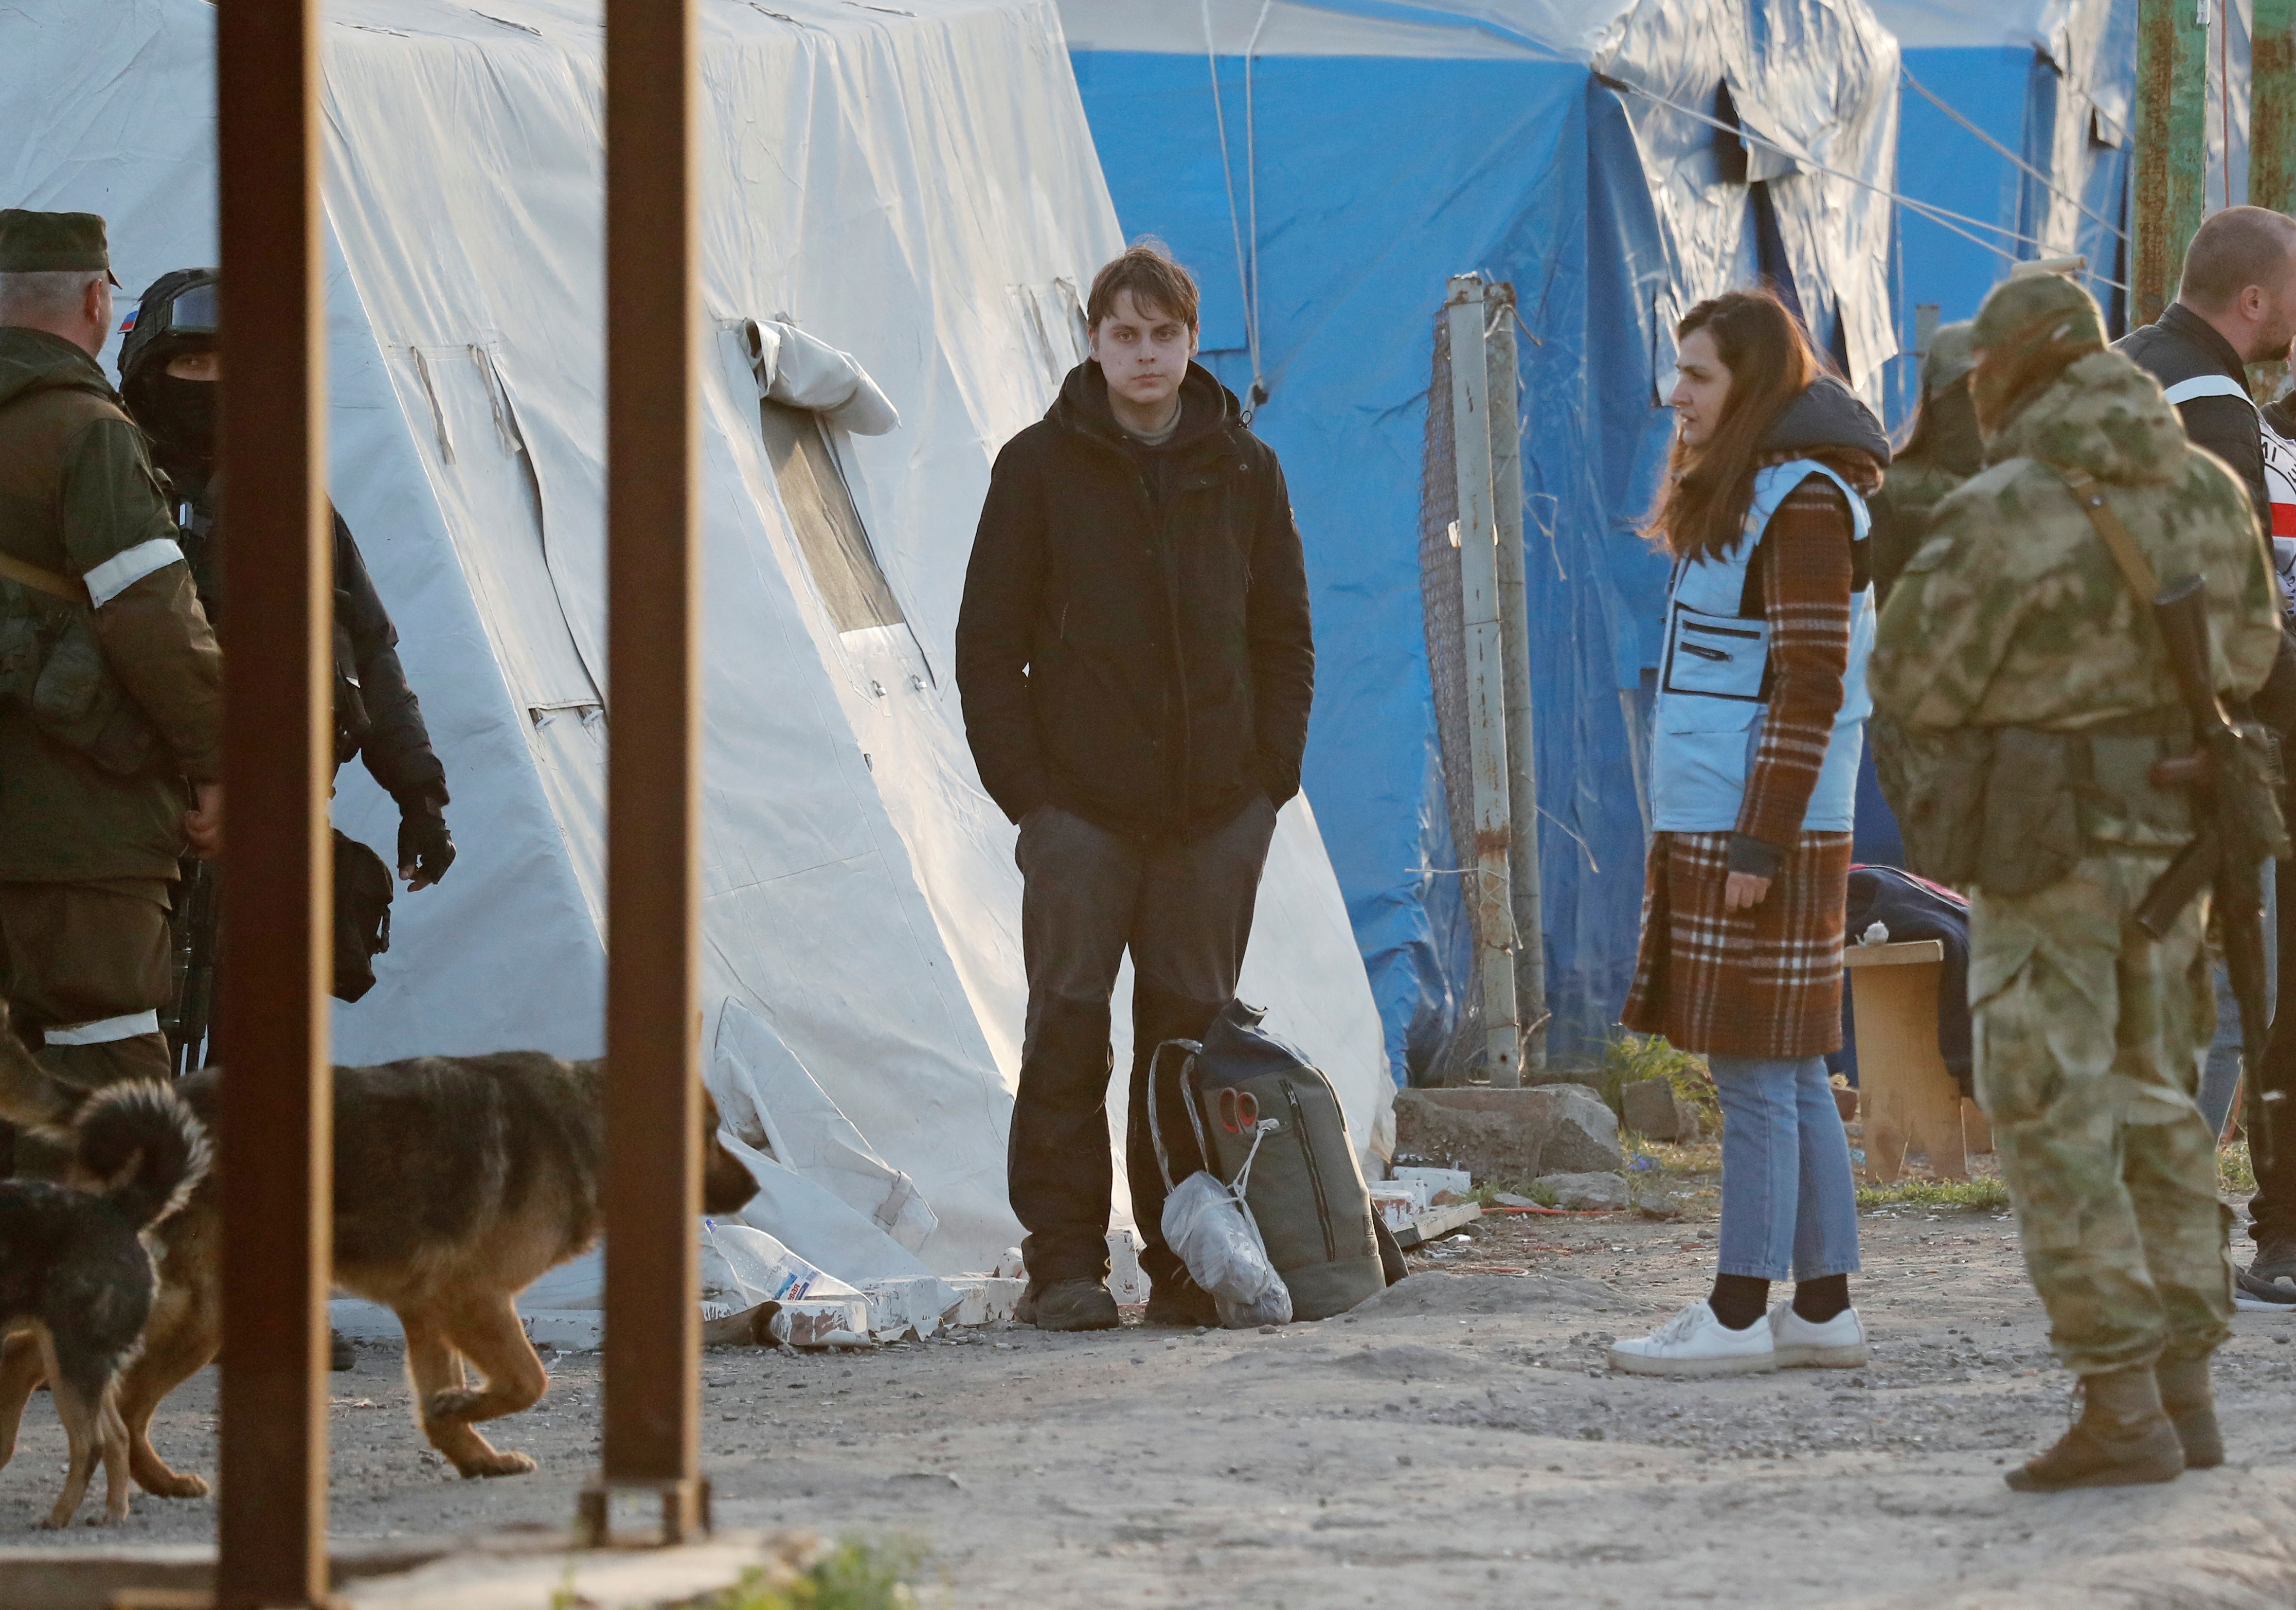 Evacuees from Azovstal steel plant arrive at a temporary accommodation centre in Bezimenne